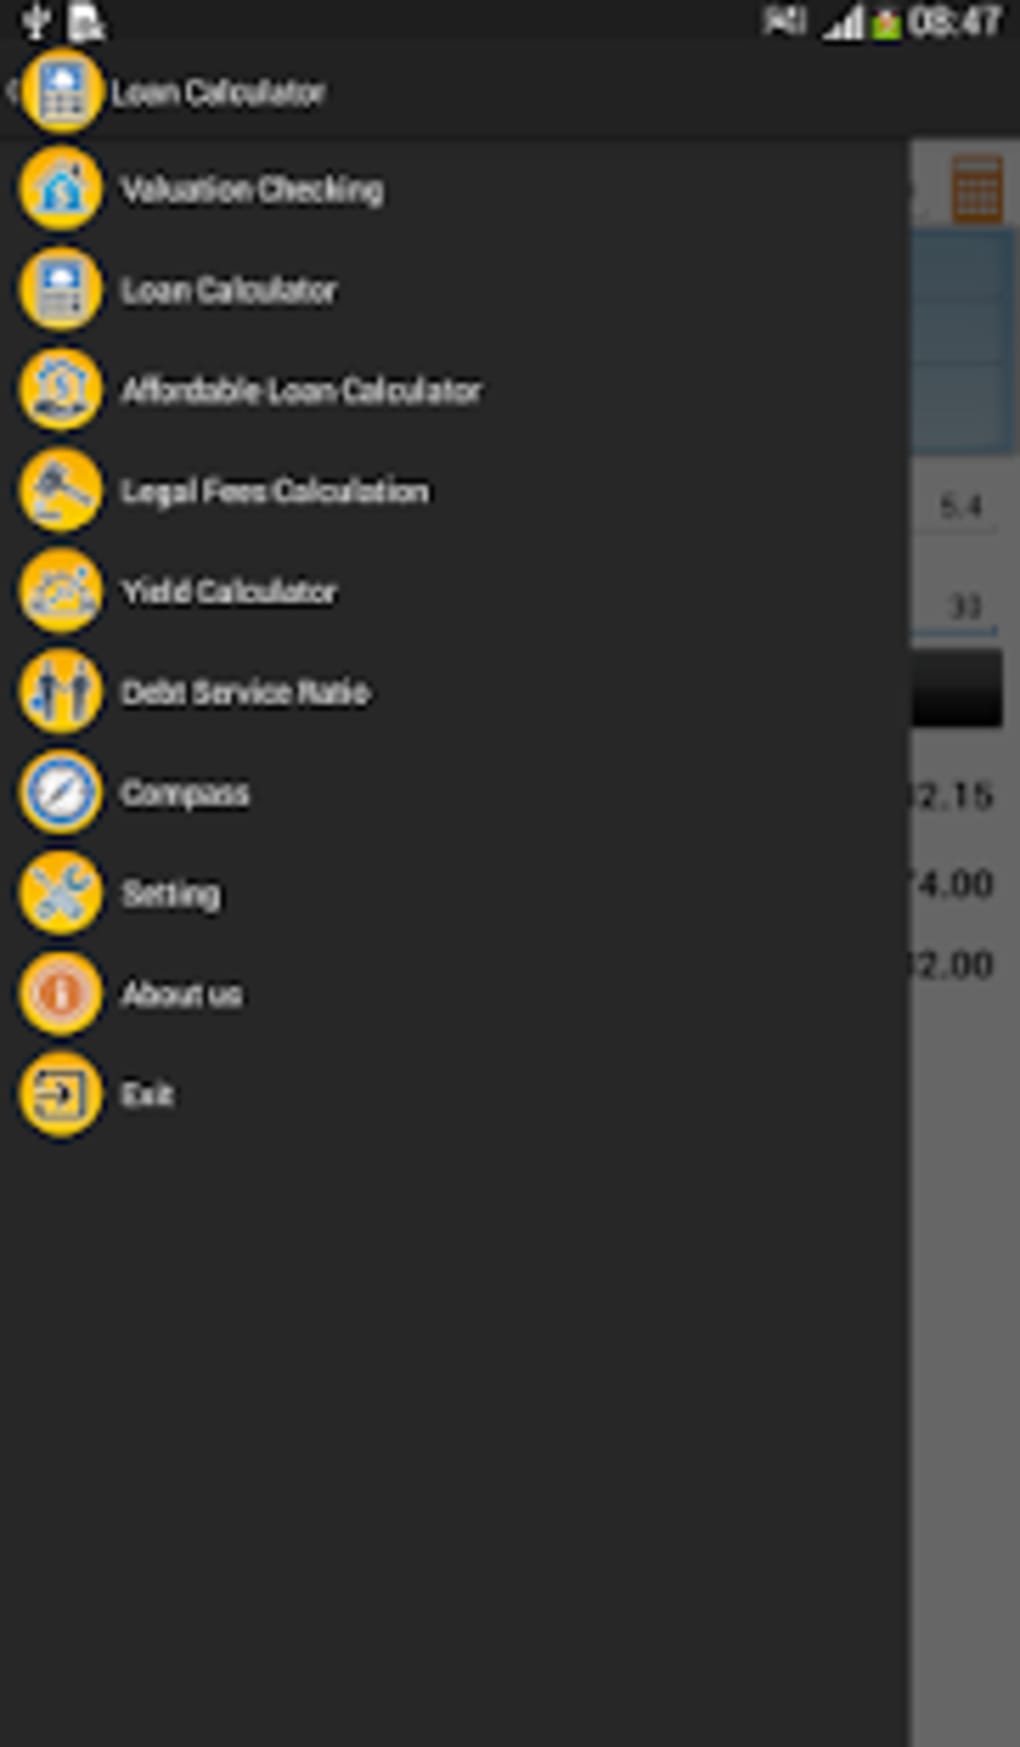 Housing Loan Calculator Apk For Android Download